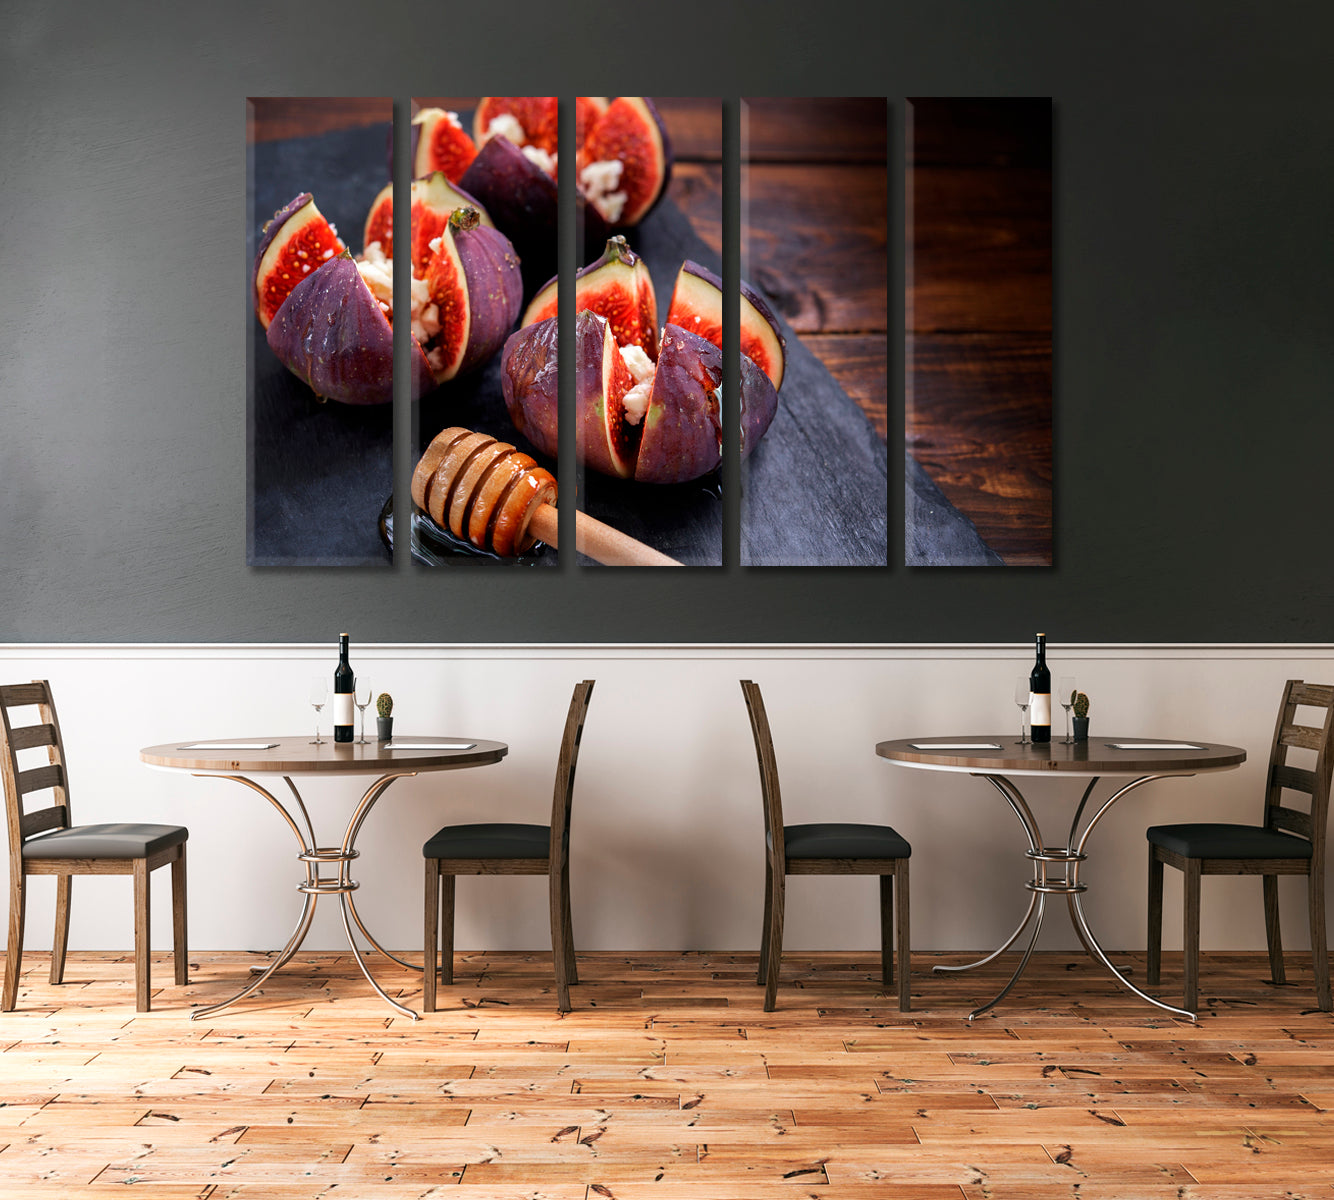 Figs with Cheese and Honey Canvas Print-Canvas Print-CetArt-1 Panel-24x16 inches-CetArt